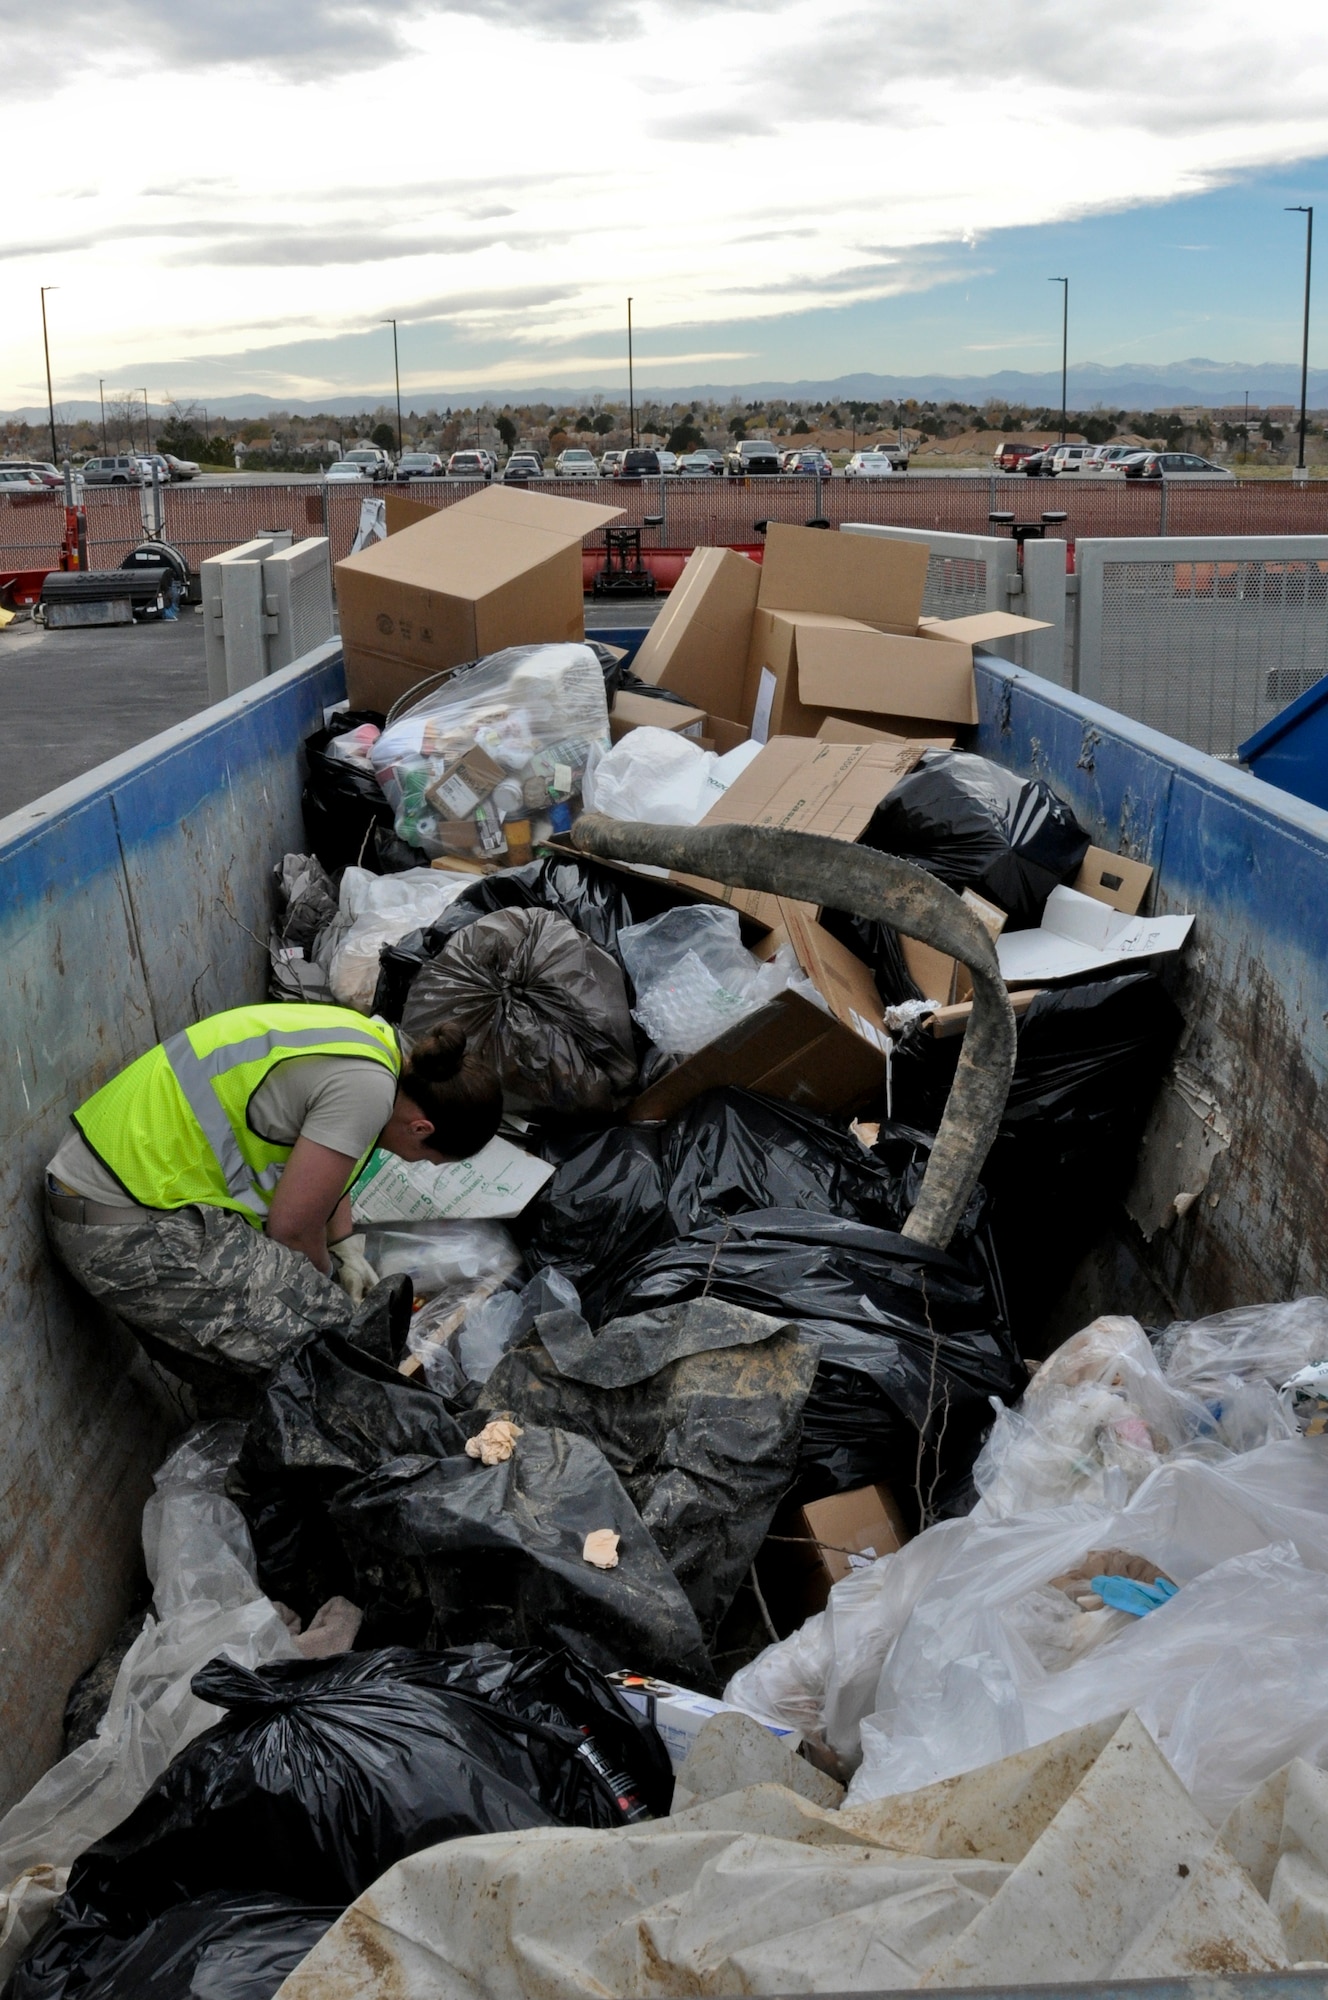 1st Lt. Liz Dunsworth, 460th Space Wing Plans and Programs office chief Crisis Action Team director, sifts through the trash looking for non-shredded documents Nov. 8, 2013, on Buckley Air Force Base, Colo. This search was part of an ongoing initiative to guarantee the base 100-percent shred policy is followed. (U.S. Air Force photo by Staff Sgt. Nicholas Rau/Released)